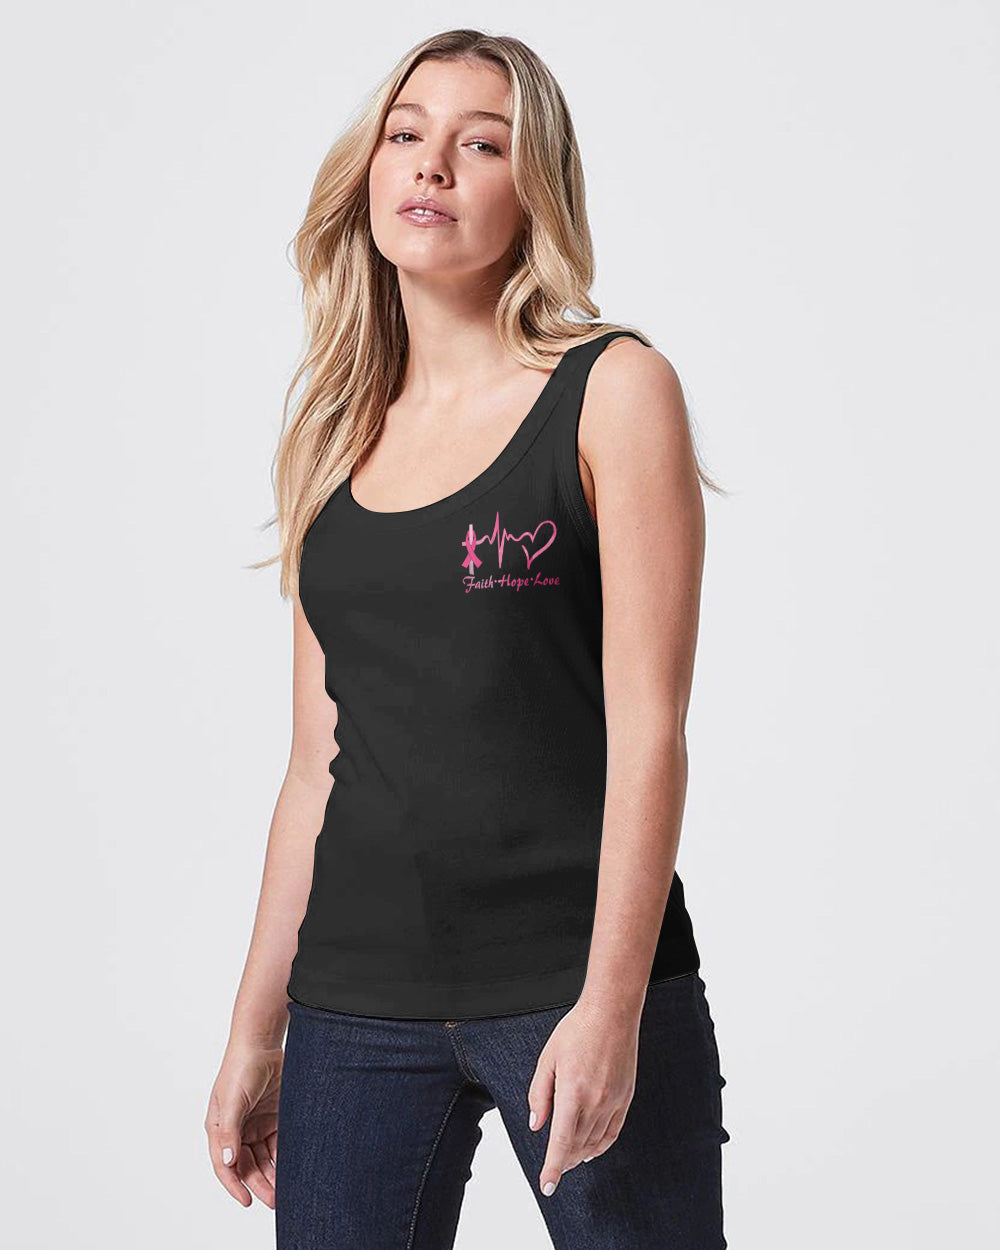 I Wasn't Given A Choice Half Wings Pink Ribbons Women's Breast Cancer Awareness Tanks